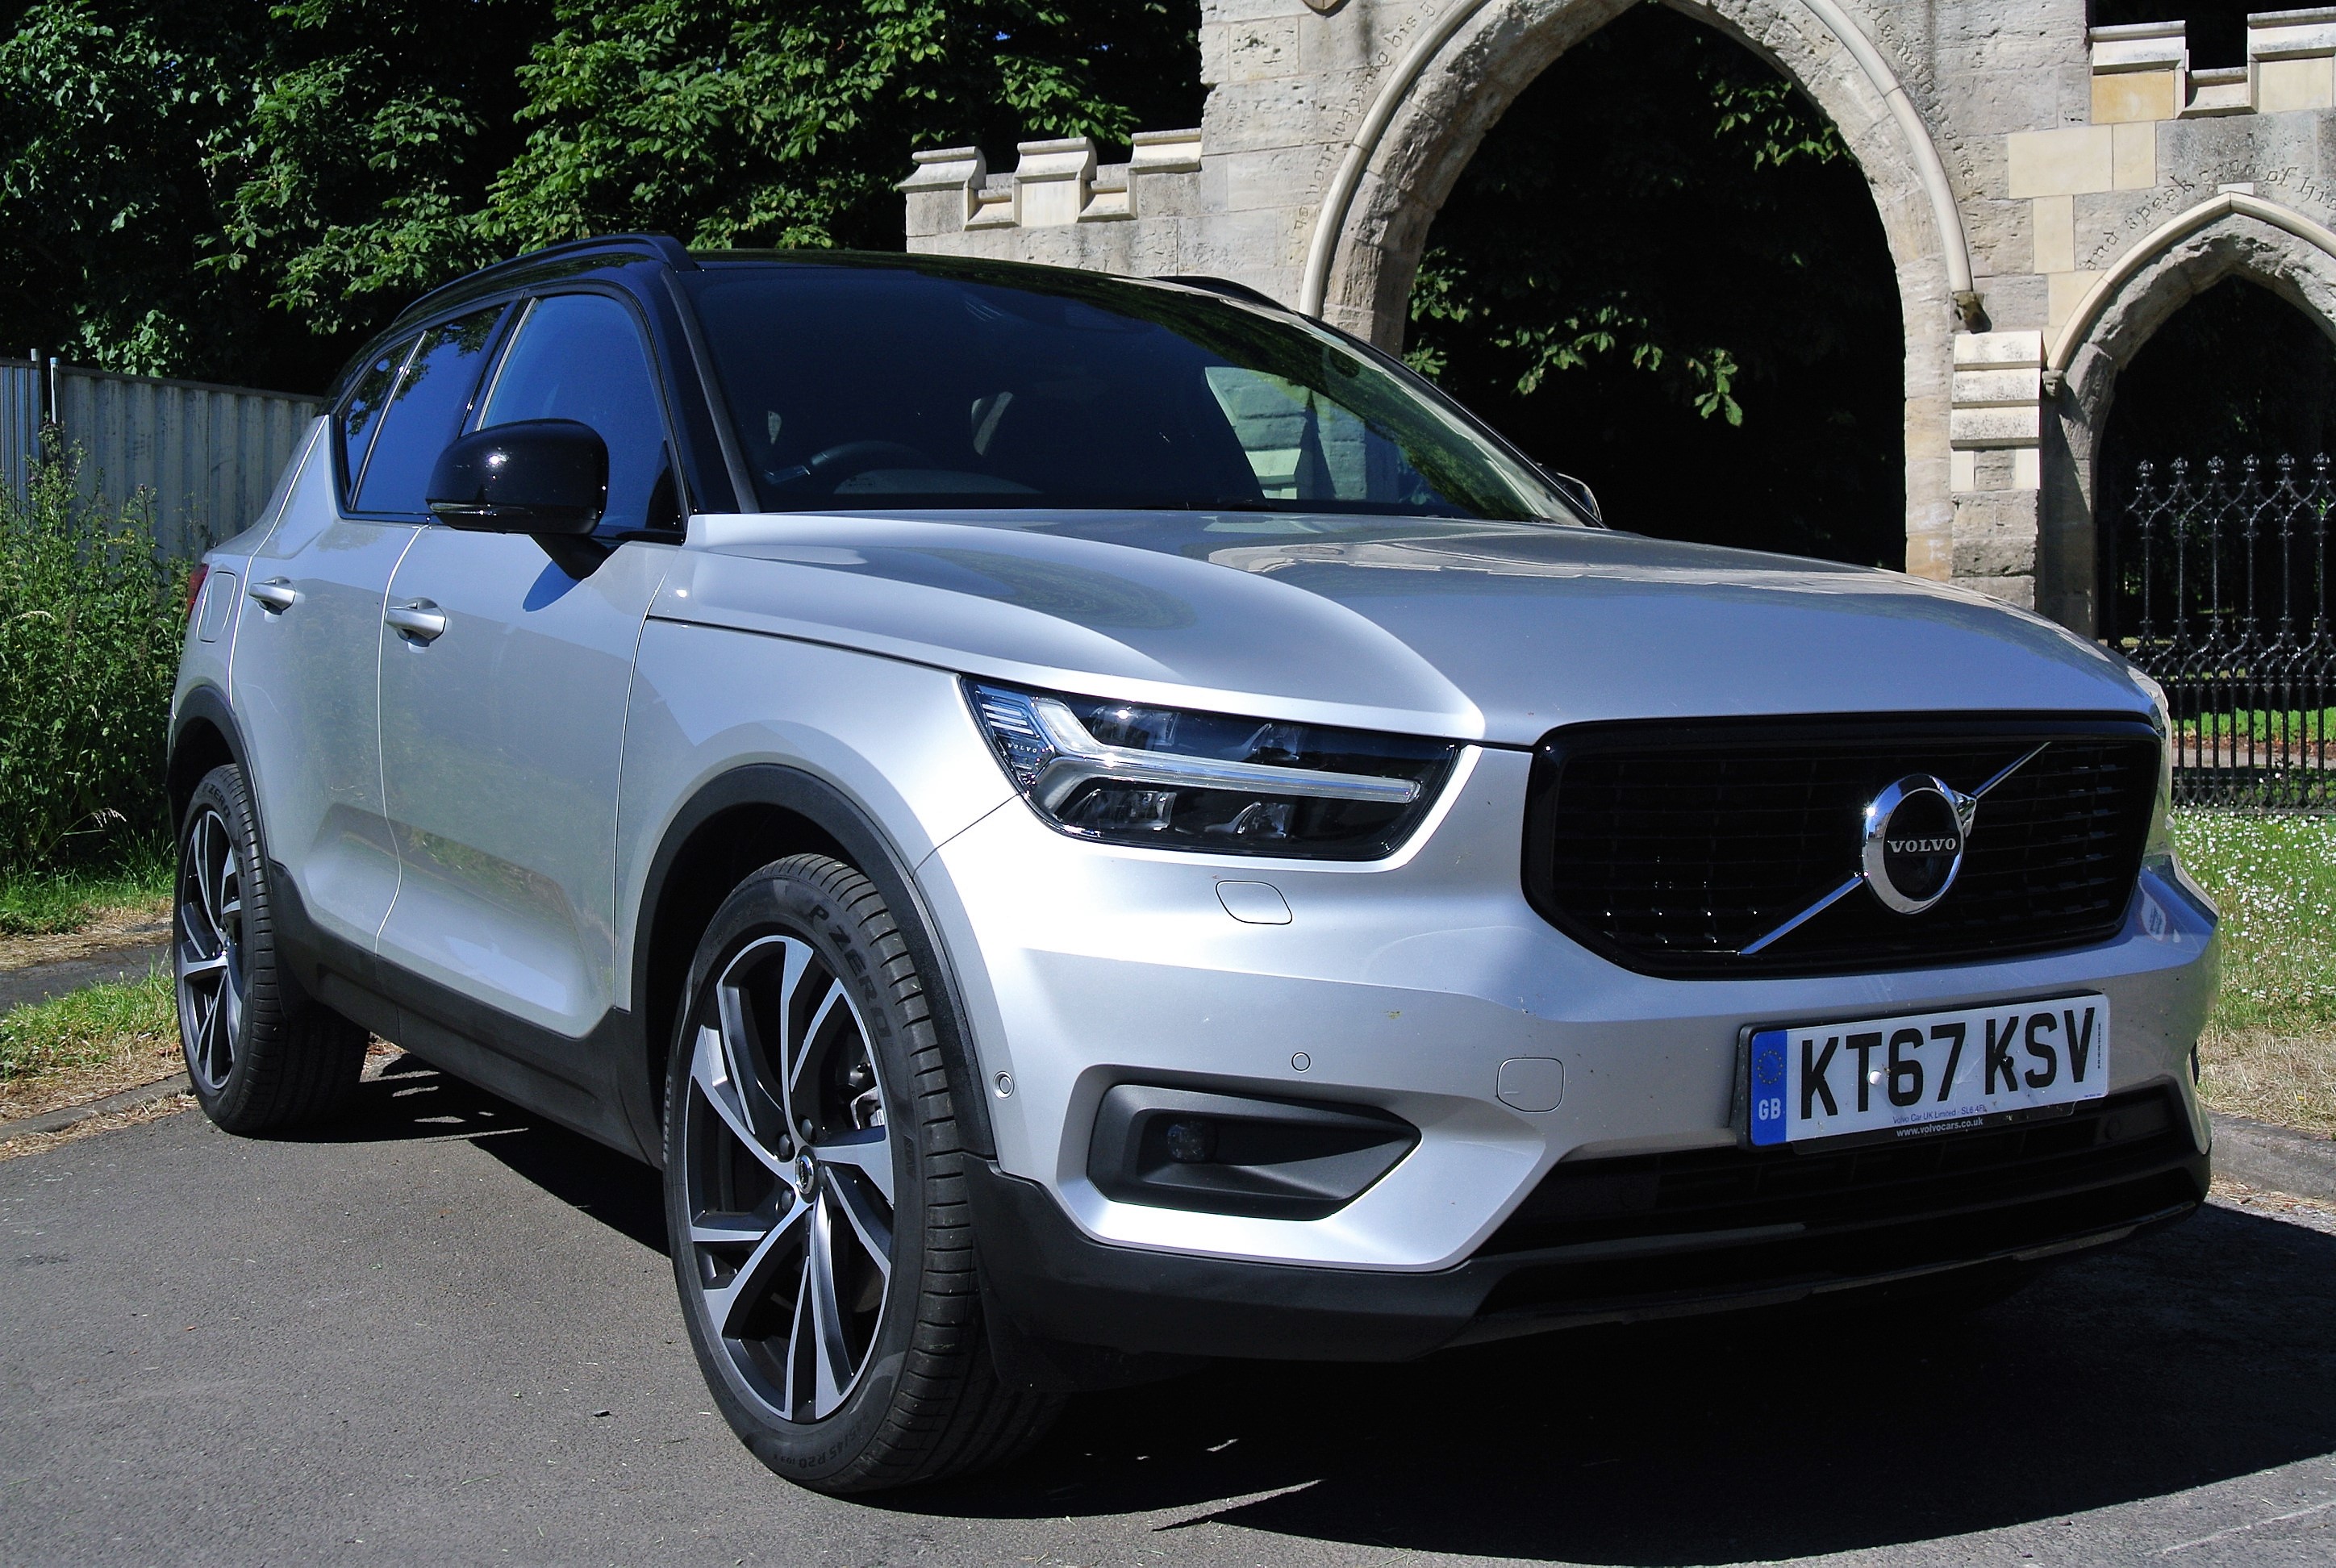 Volvo creates the ultimate fruit squash with its concentrated XC40